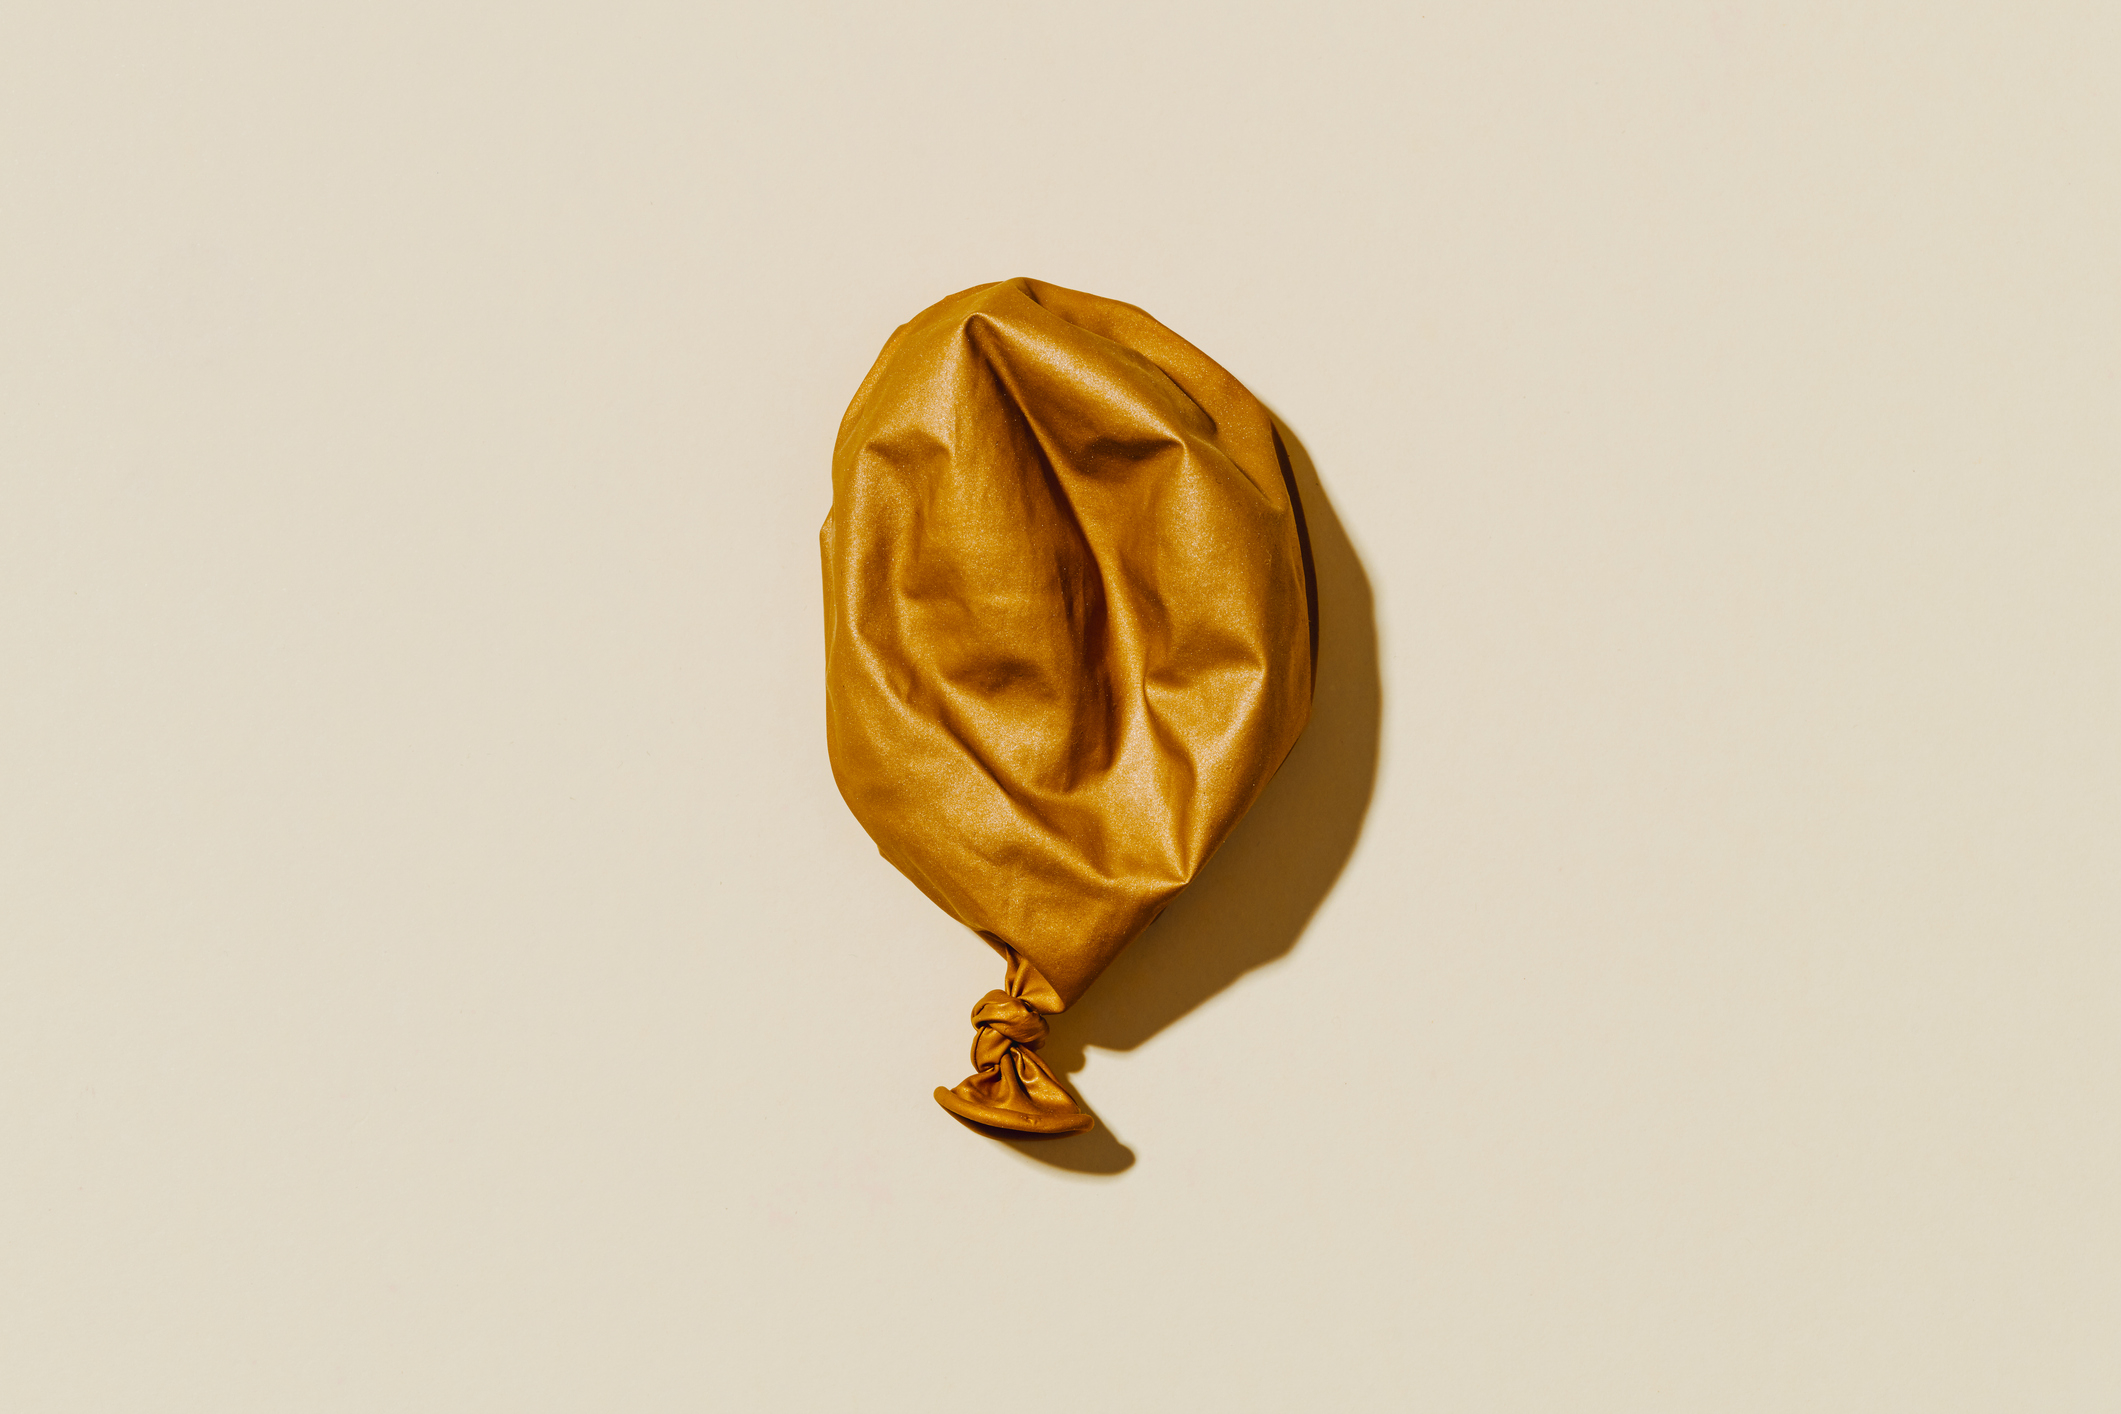 A deflated gold balloon on a plain background, related to themes of romance and relationships